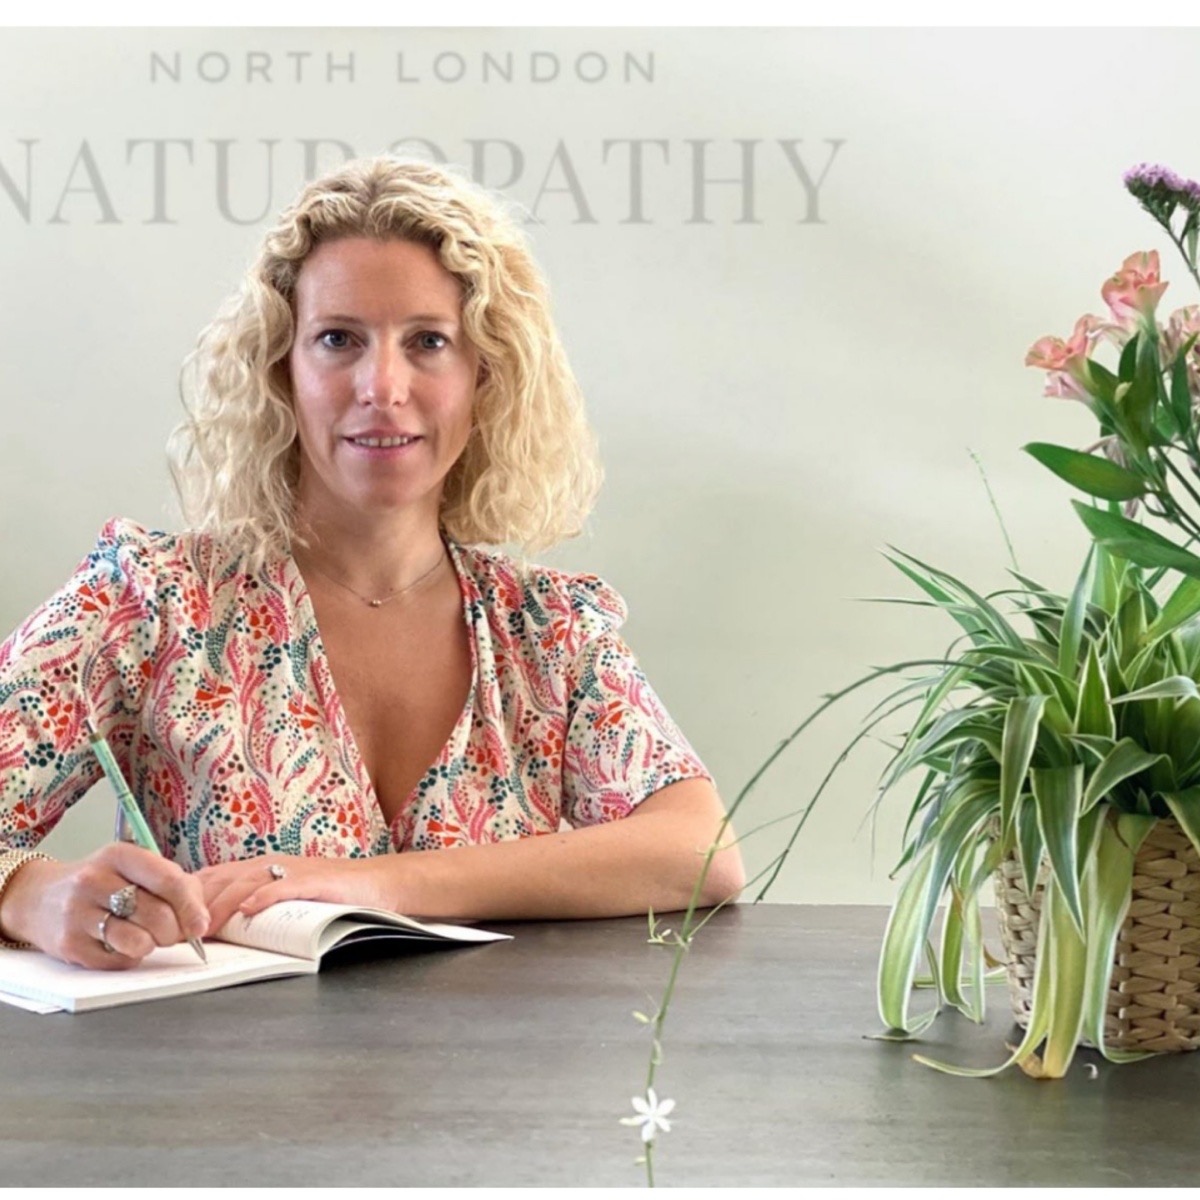 Profile picture for North London Naturopathy